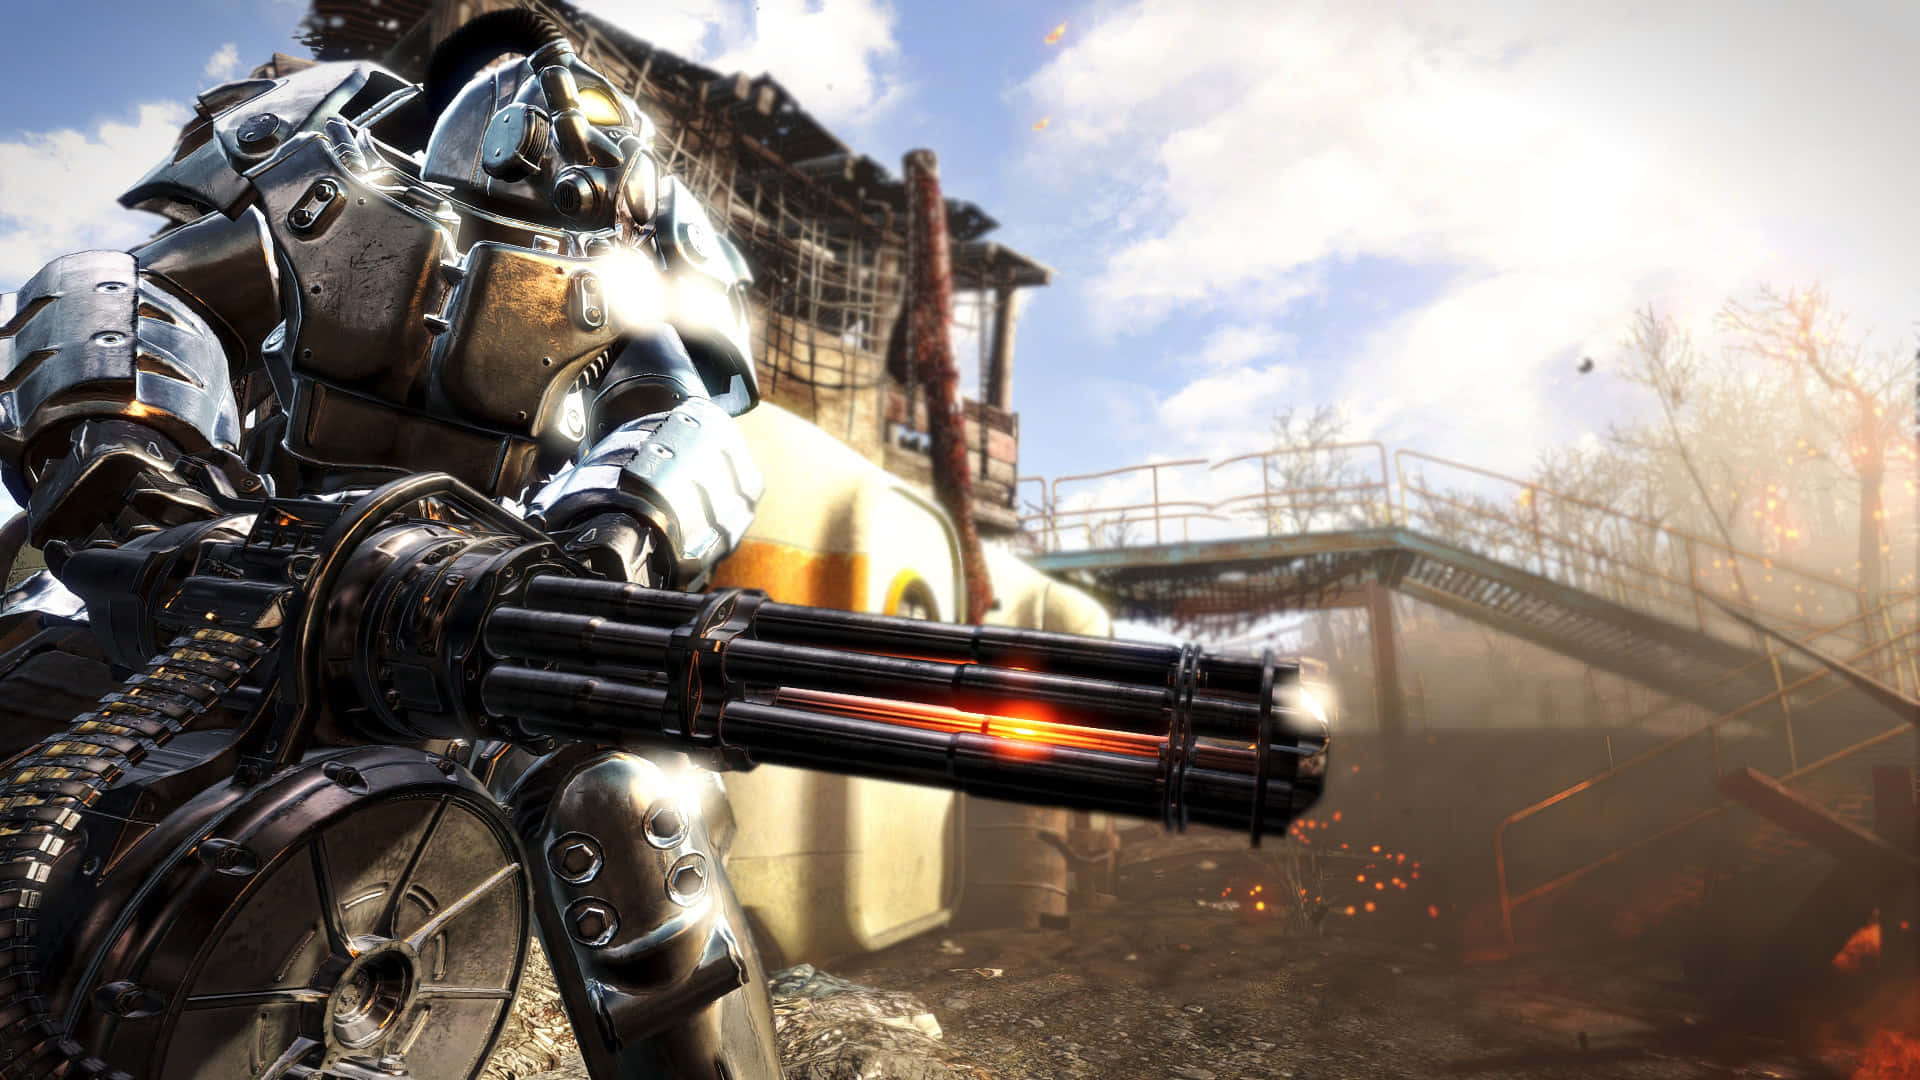 Warrior strides across the wasteland in Fallout 4 Power Armor Wallpaper